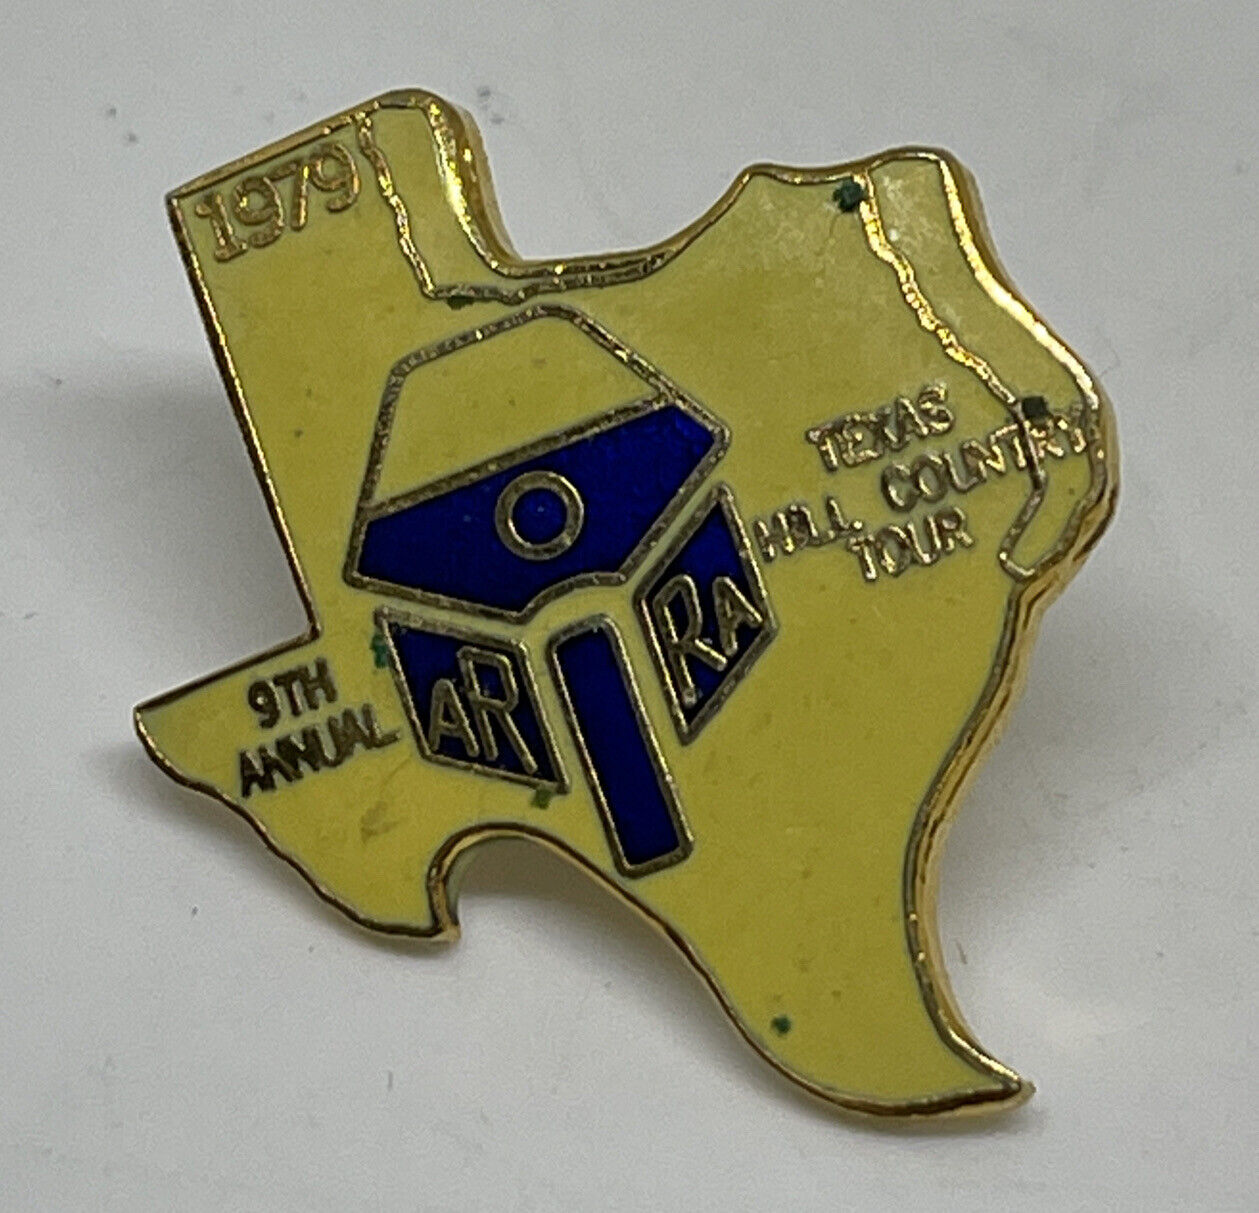 1979 9TH Annual Texas Hill Country Tour Lapel Hat Pin VTG